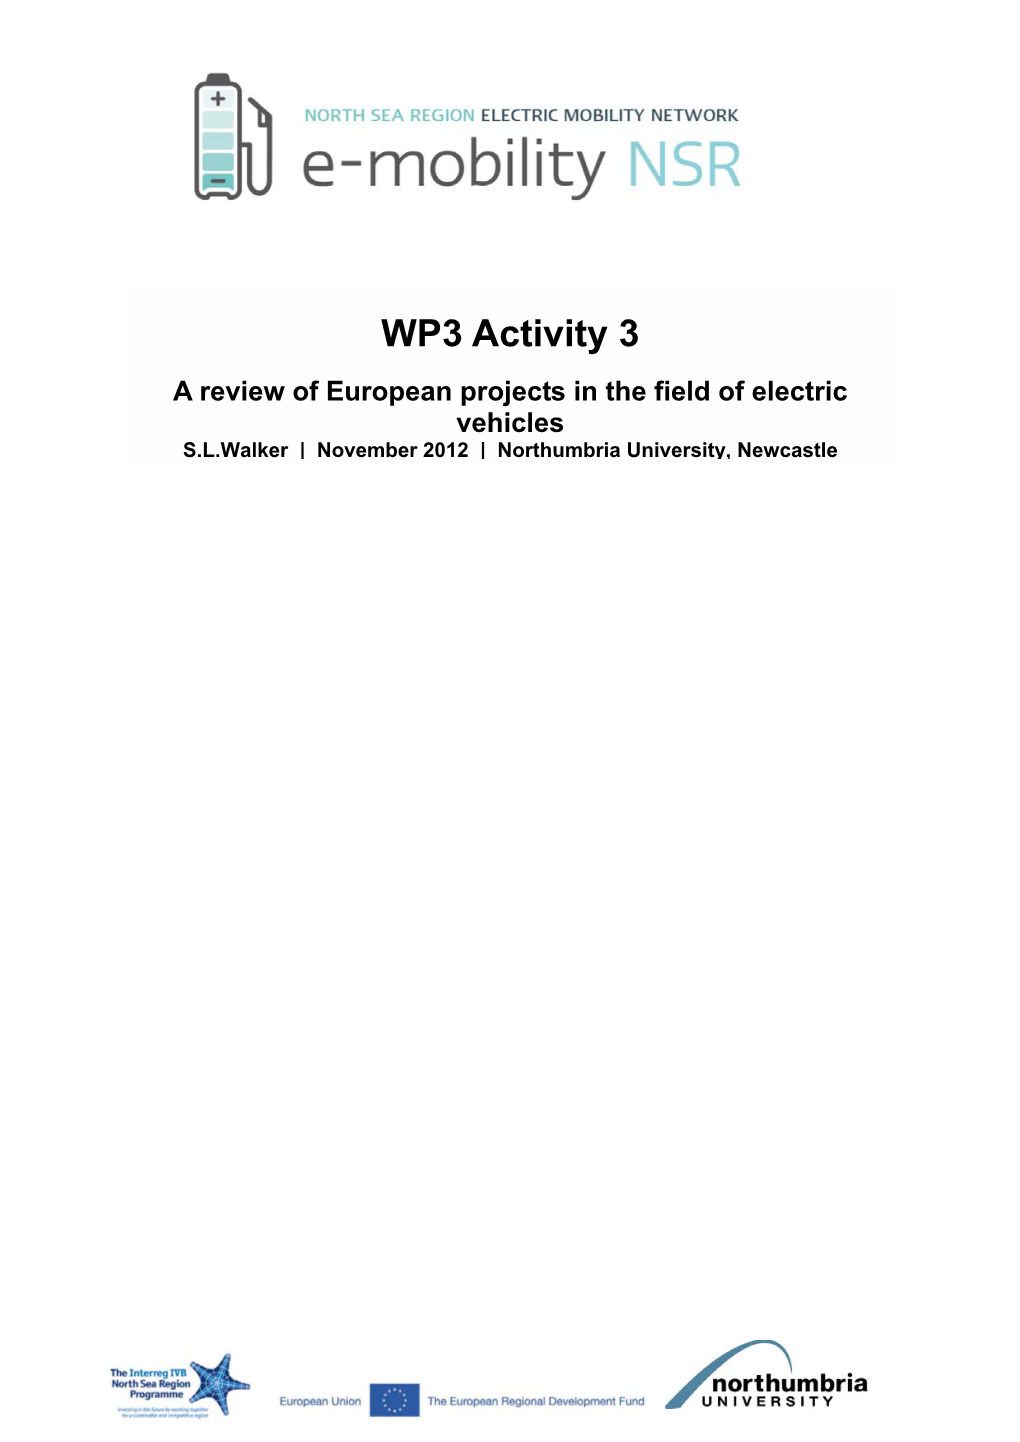 WP3 Activity 3 a Review of European Projects in the Field of Electric Vehicles S.L.Walker | November 2012 | Northumbria University, Newcastle